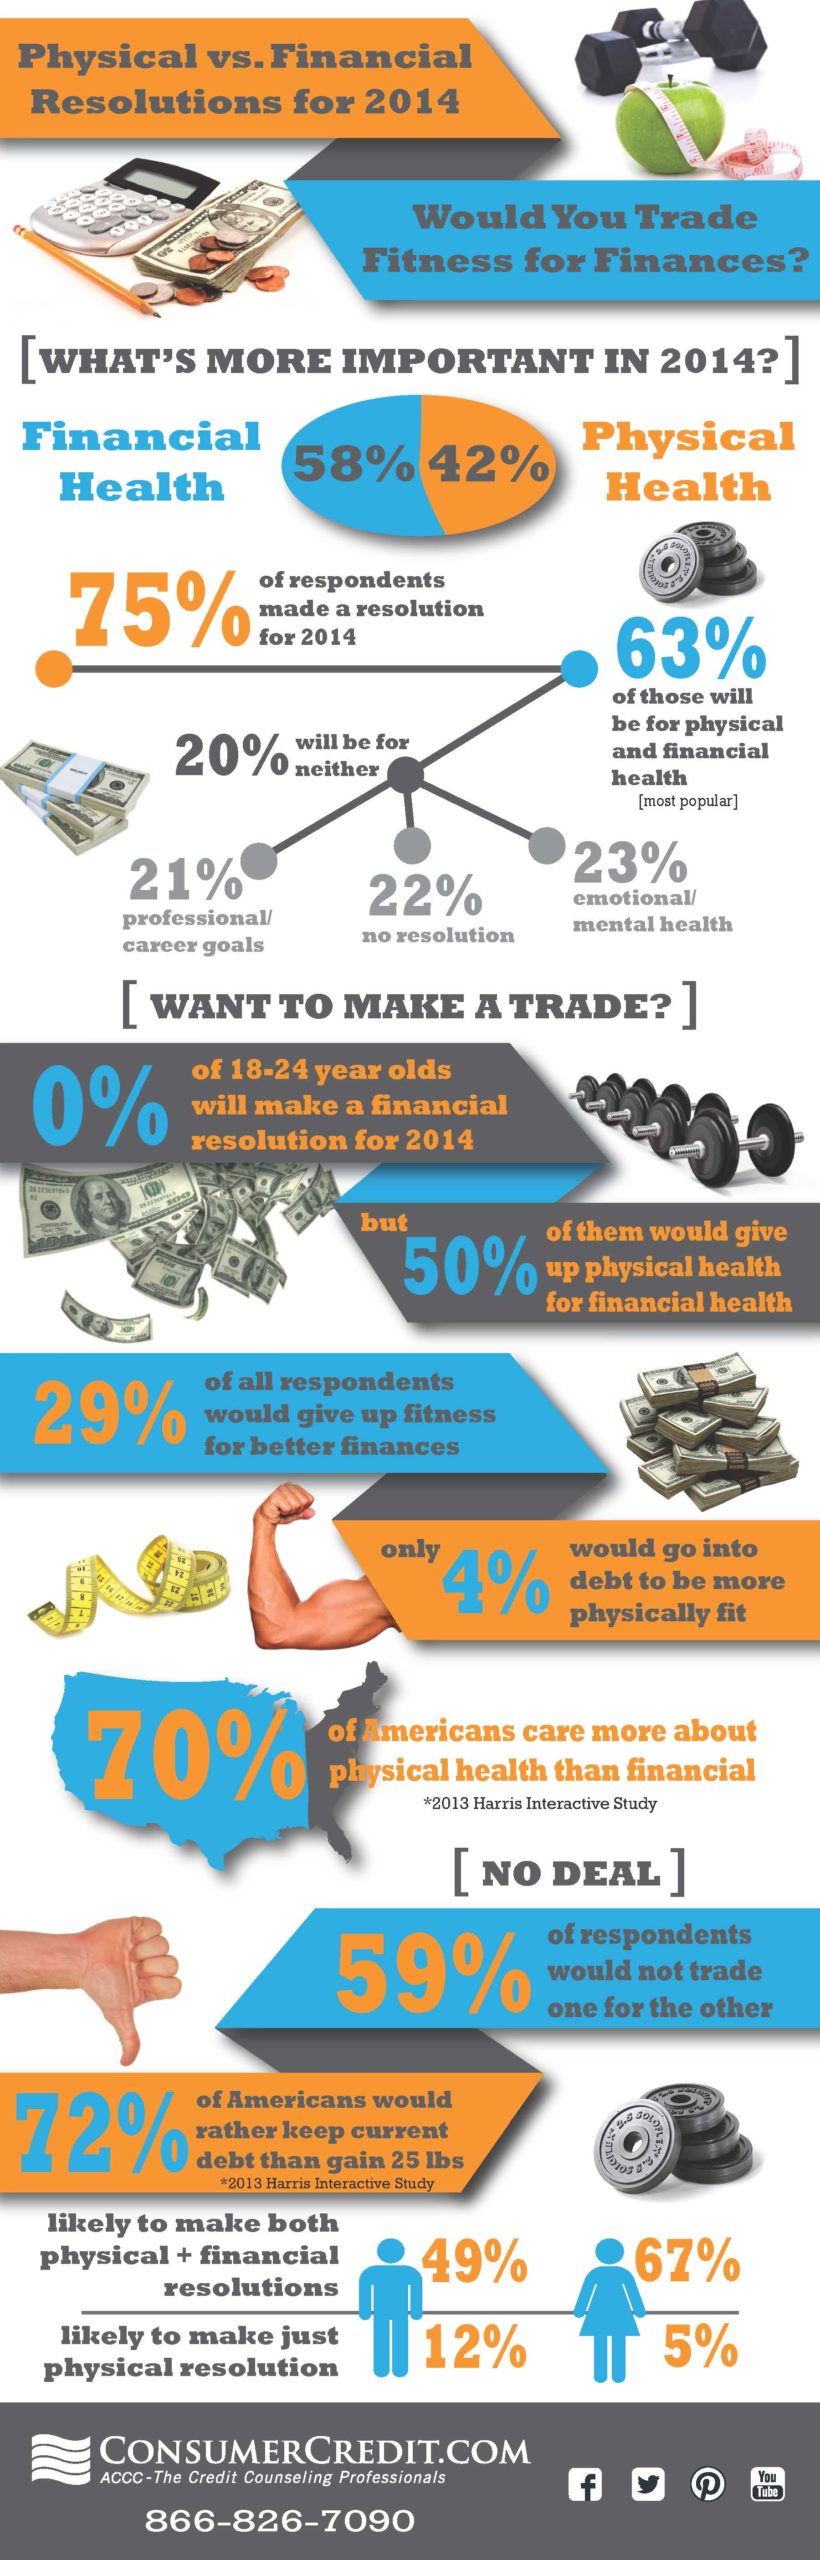 Physical Vs. Financial Resolutions For 2014